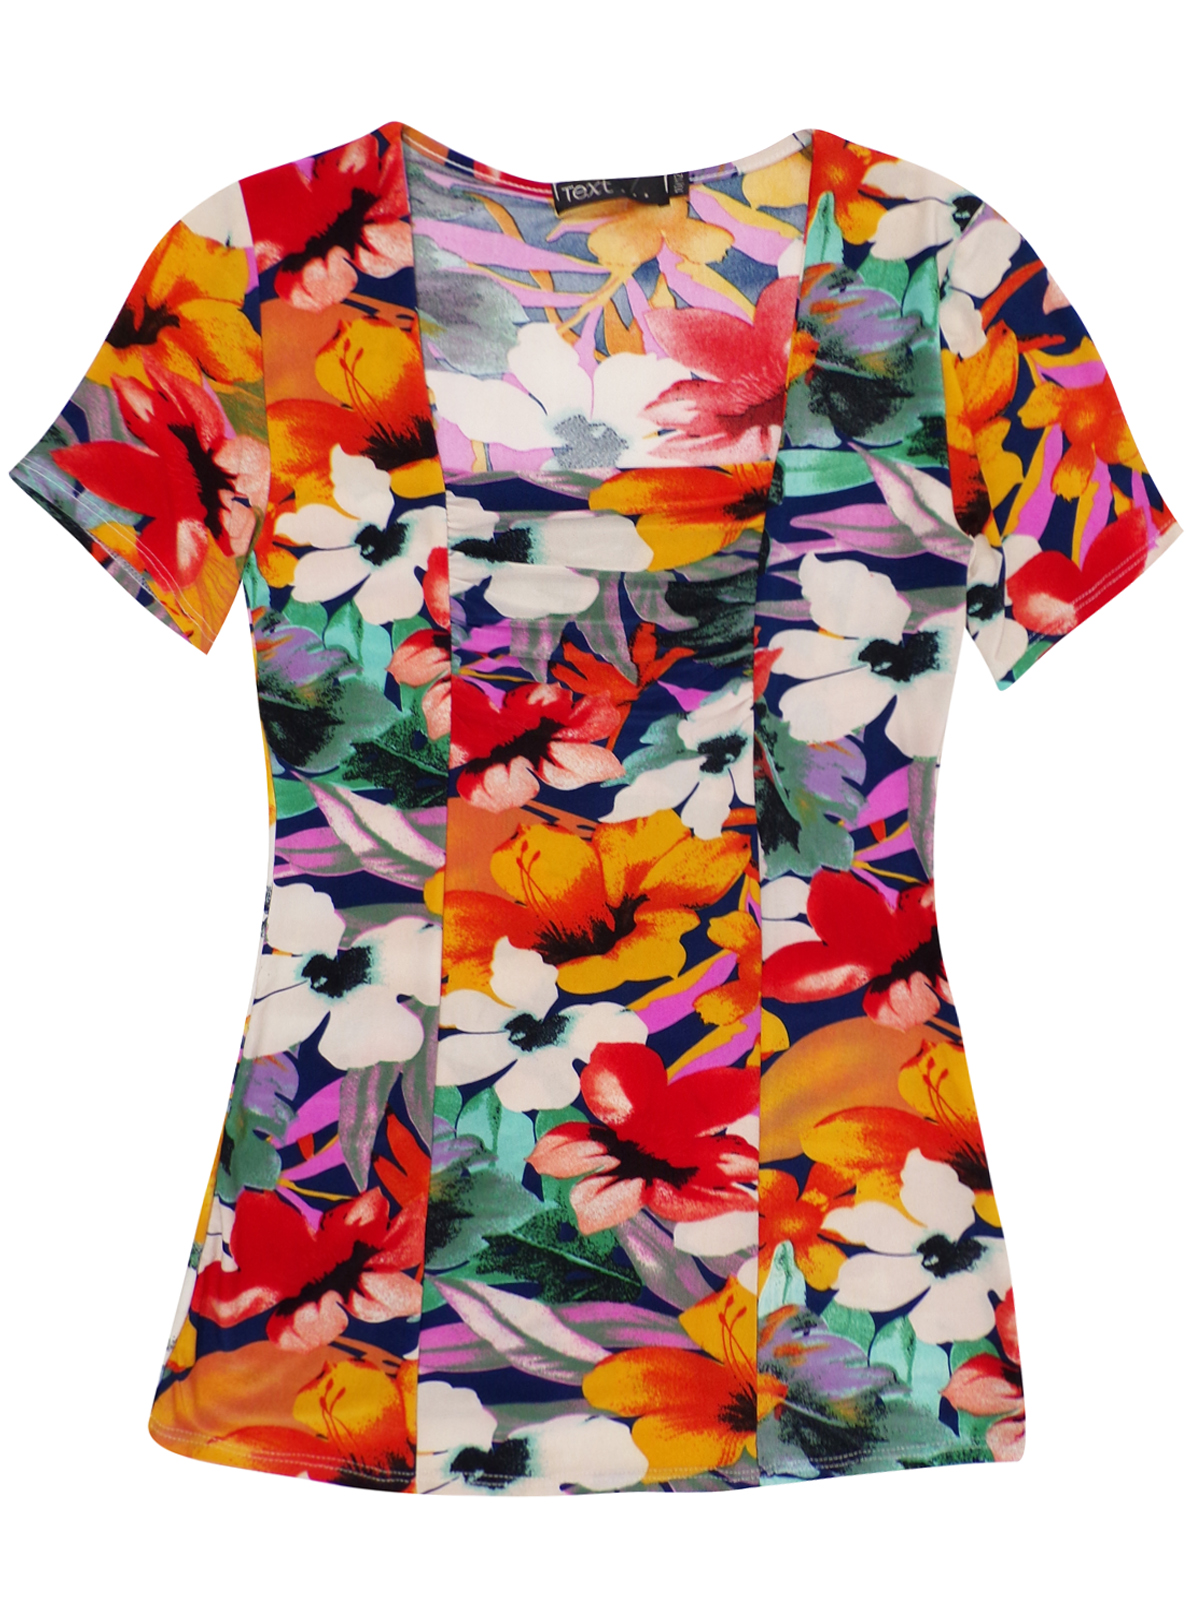 //text.. - - MULTI Ruched Front Floral Print Short Sleeve Top - Size 6 ...